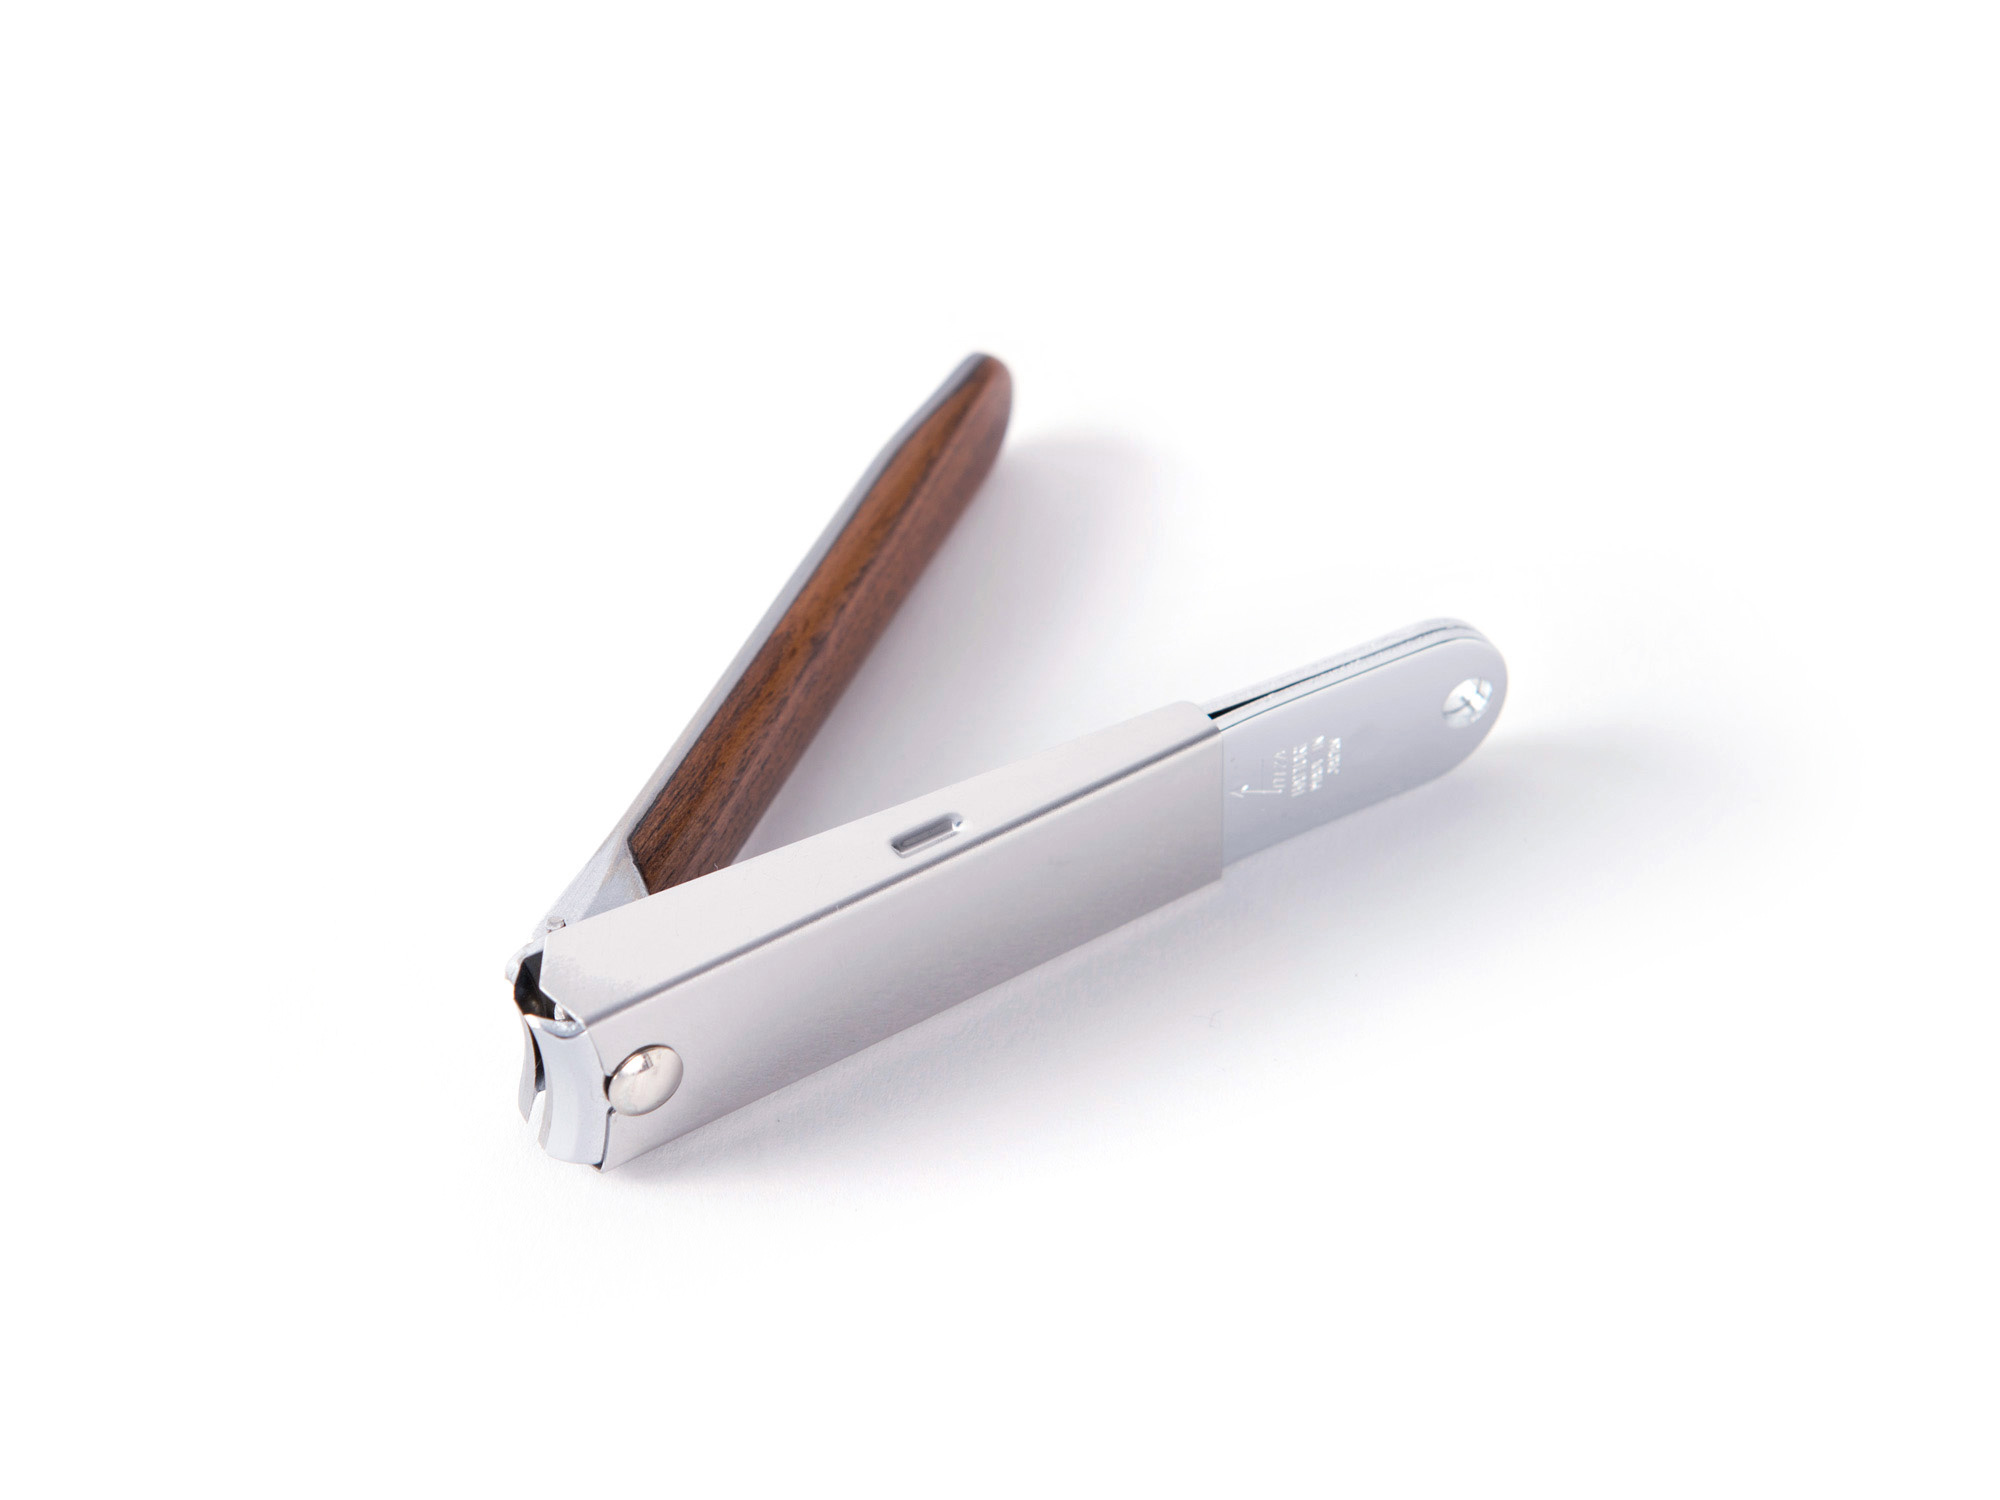 Established 1959<br />
These keen-edged nail clippers are made by craftsmen carrying on the skills of traditional swordsmiths